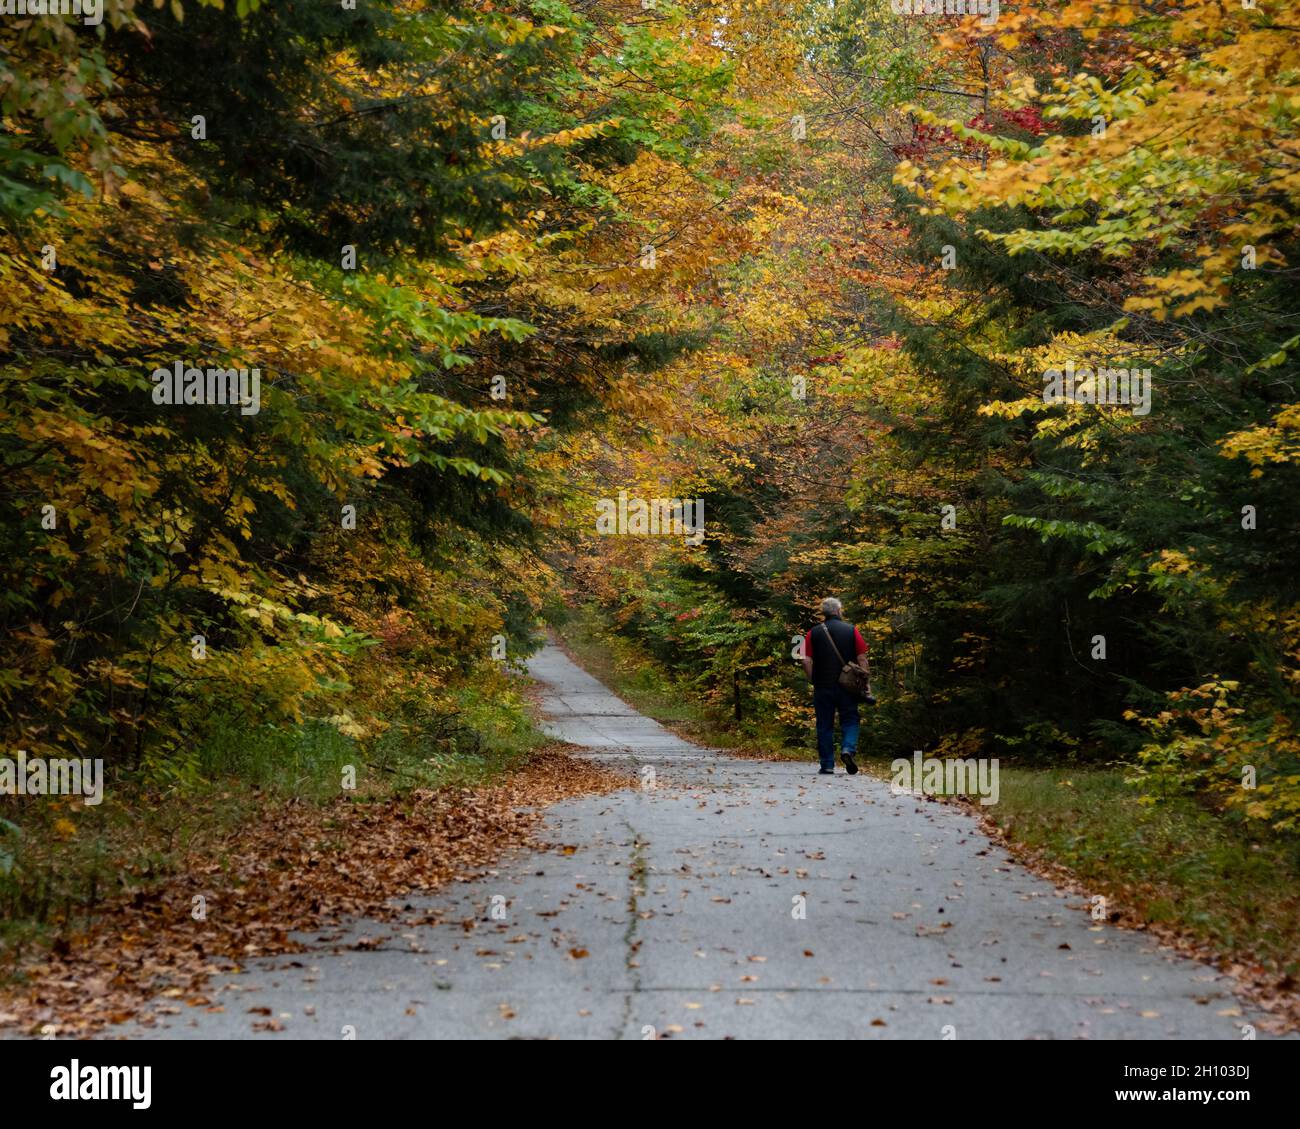 An old man with a camera walking on an old road in the Adirondack Mountains, NY in autumn with colorful fall leaves Stock Photo